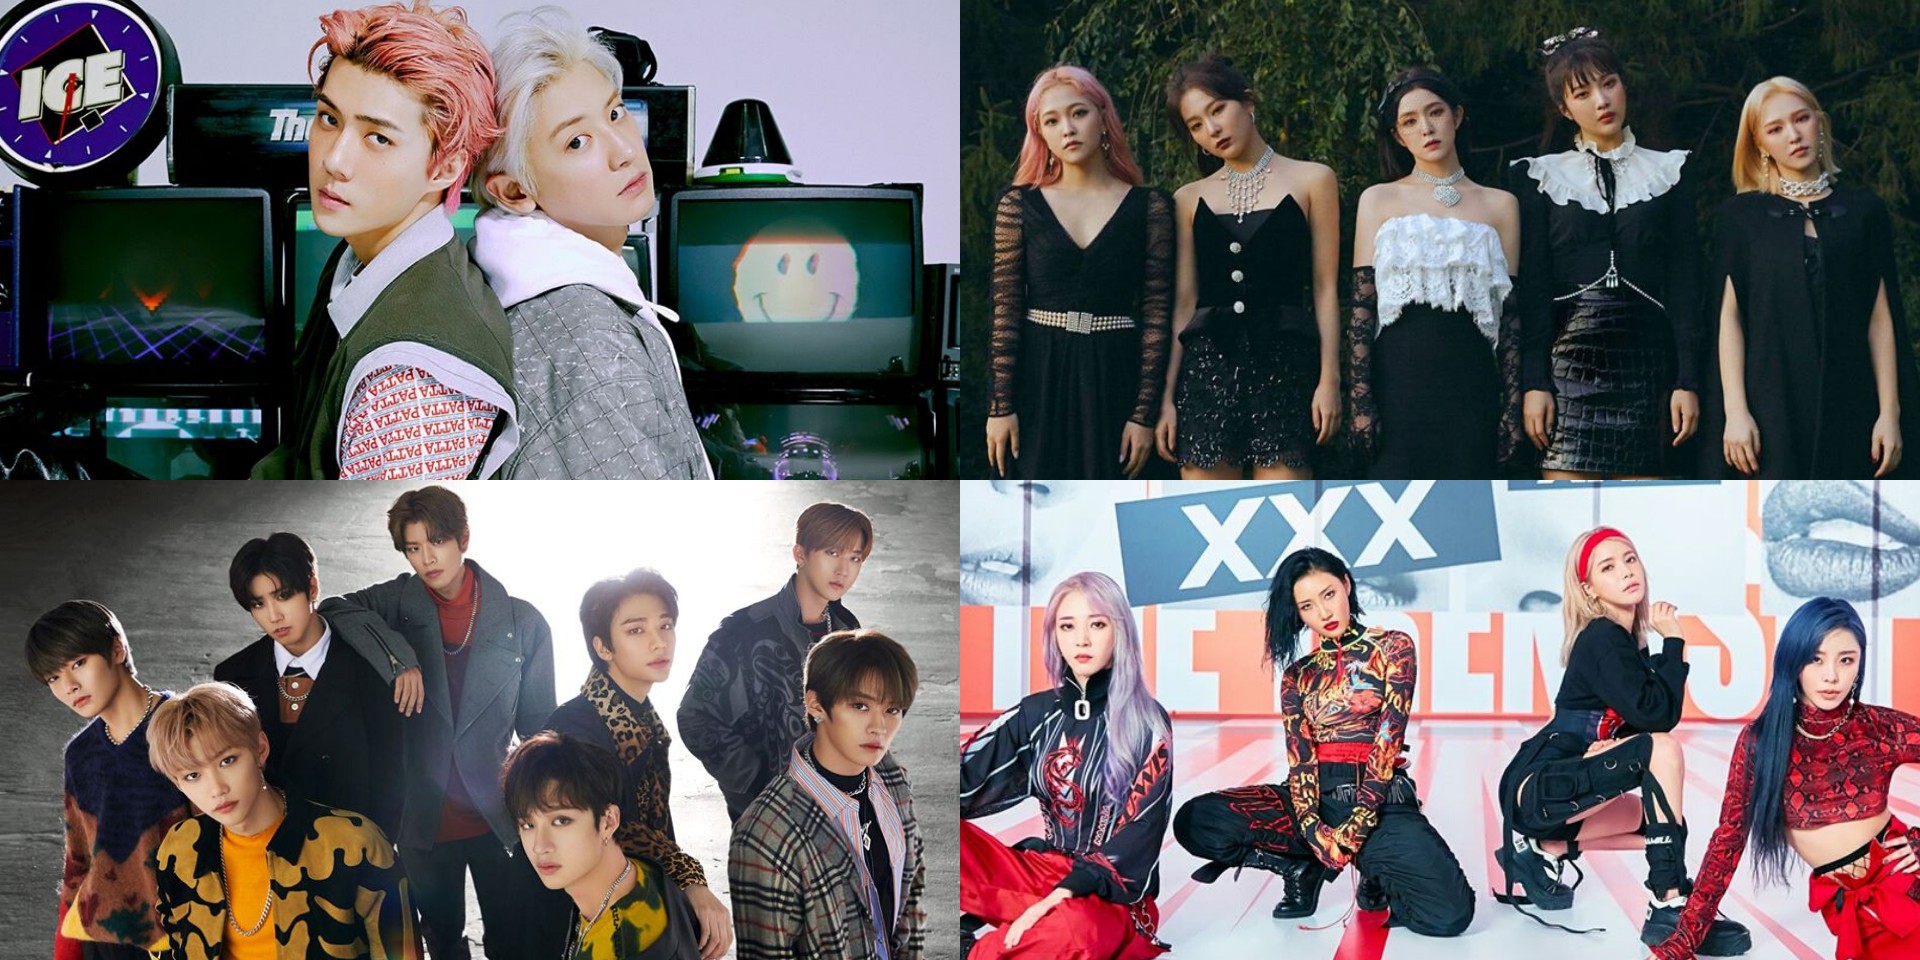 K-Pop’s largest joint show, Dream Concert, launches online edition 'CONNECT:D' with Red Velvet, EXO-SC, MAMAMOO, and more